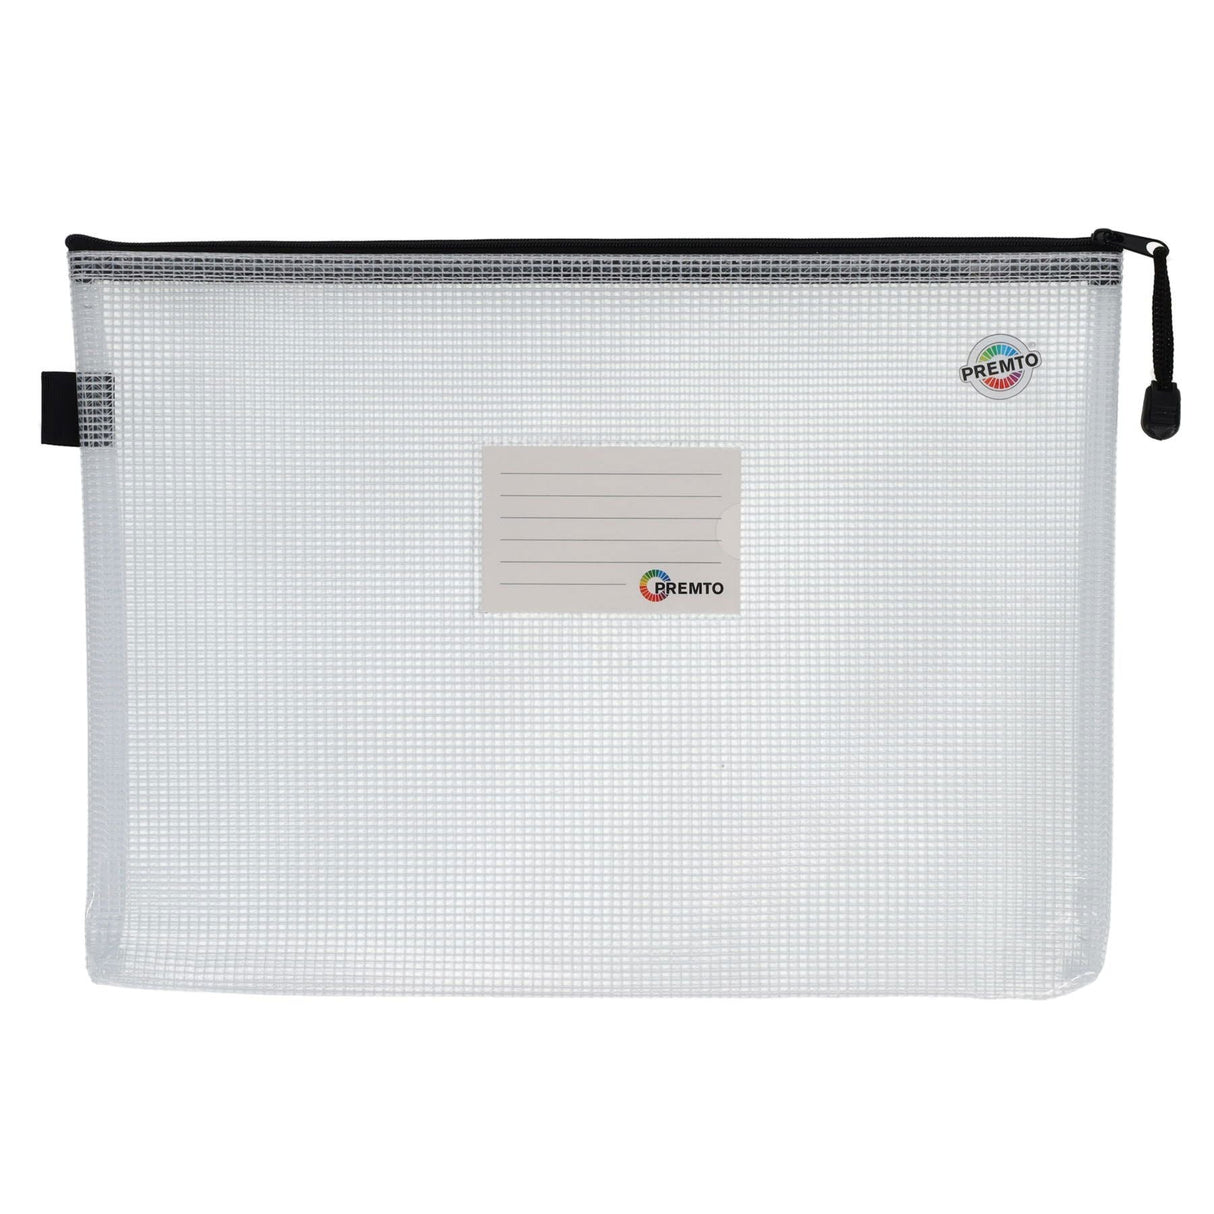 Premto Multipack | A4+ Extra Durable Mesh Storage Wallet - Clear Pearl - Pack of 3-Mesh Wallet Bags- Buy Online at Stationery Shop UK